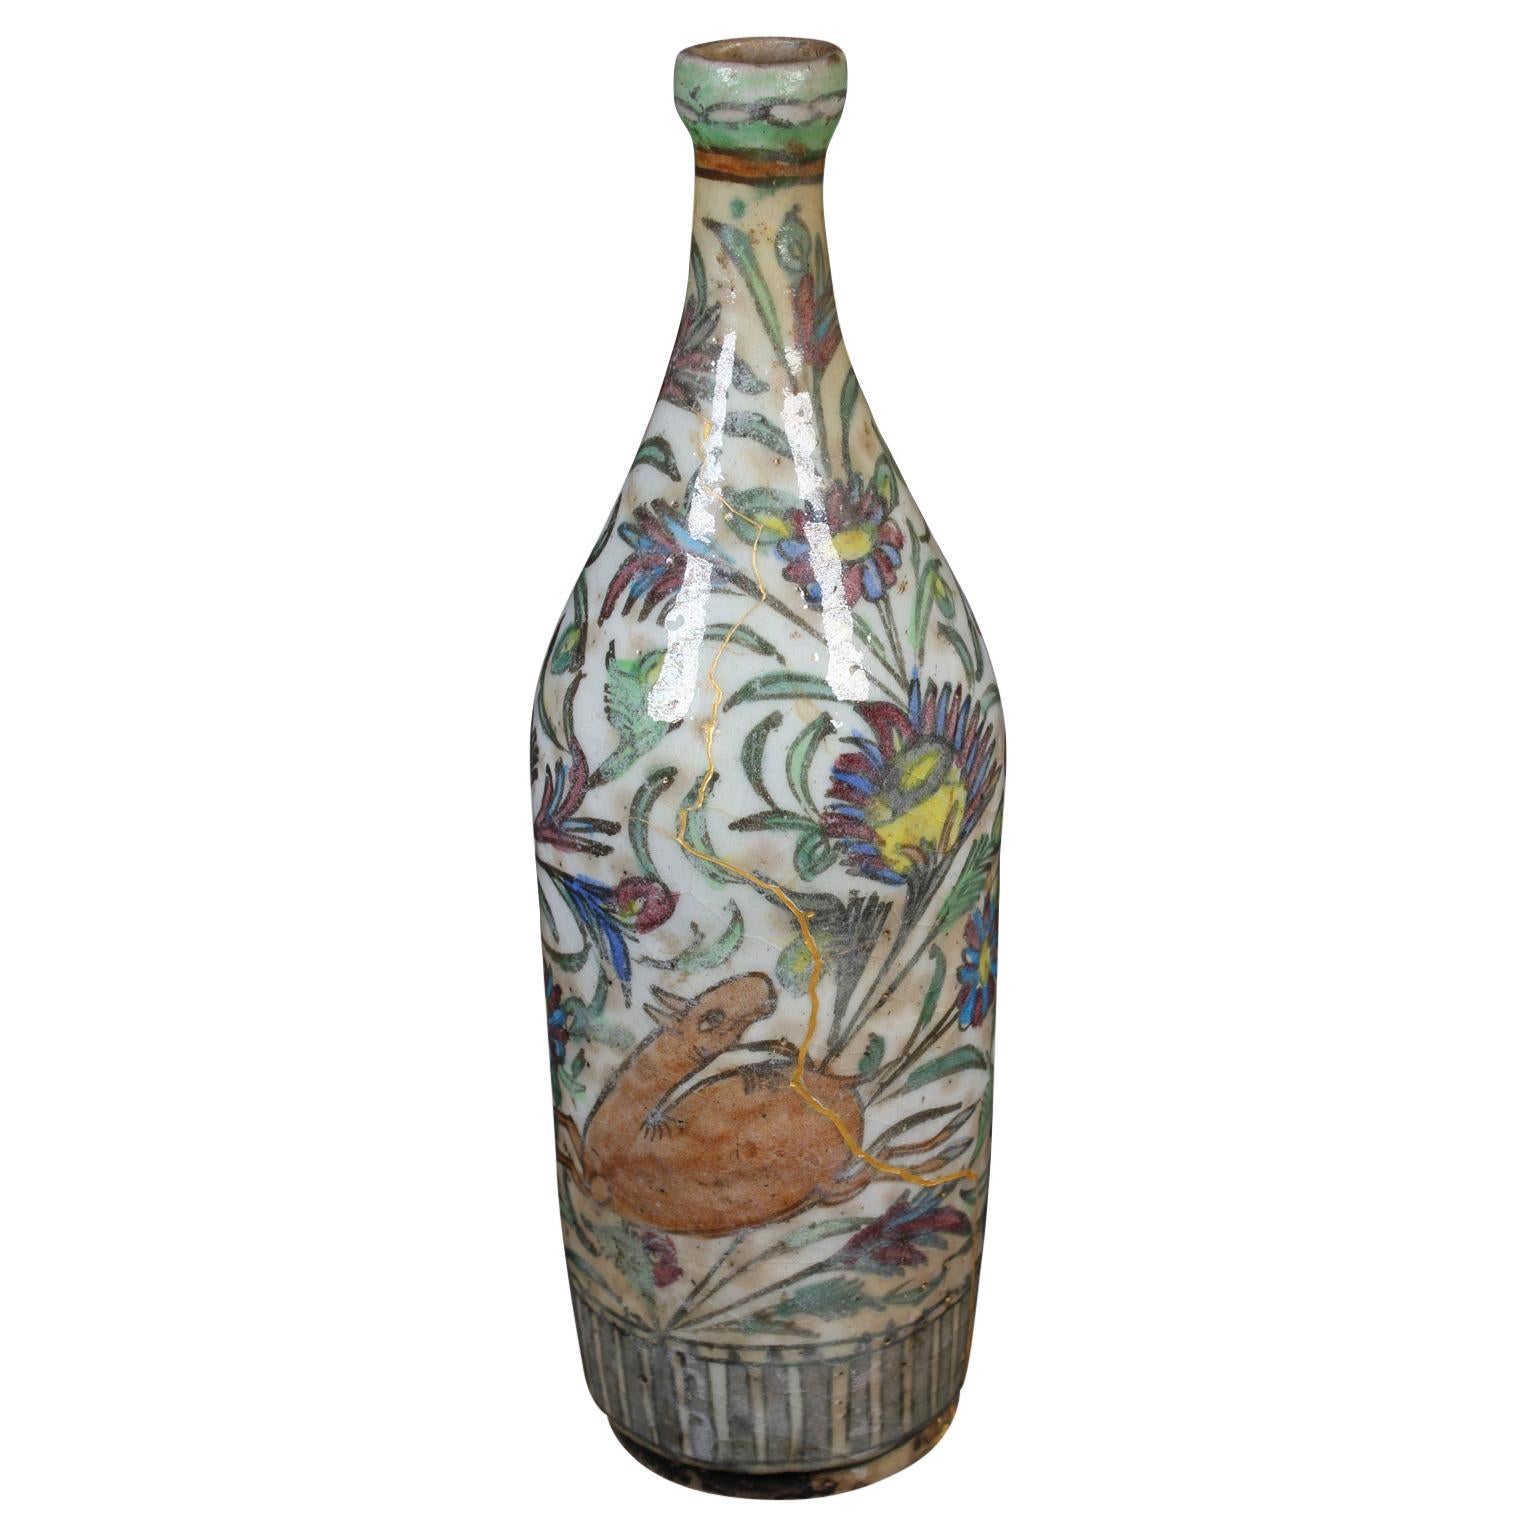 17th Century Persian Wine Bottle or Vase Repaired with Kintsugi Method